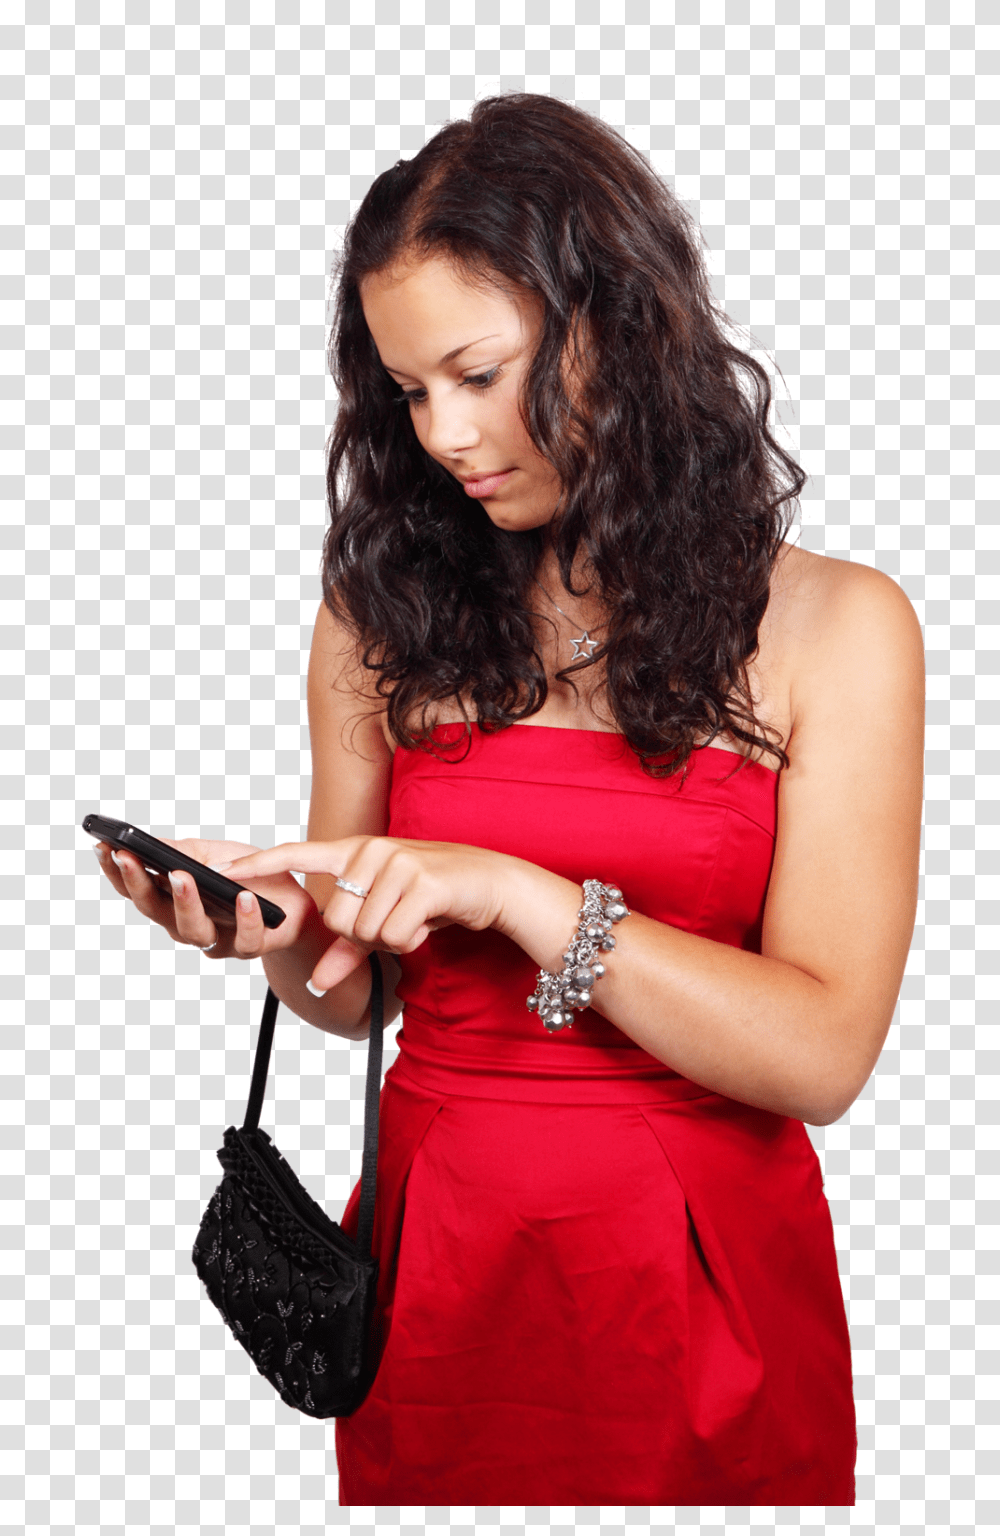 Girl With Mobile Phone Image, Person, Electronics, Texting, Hand-Held Computer Transparent Png